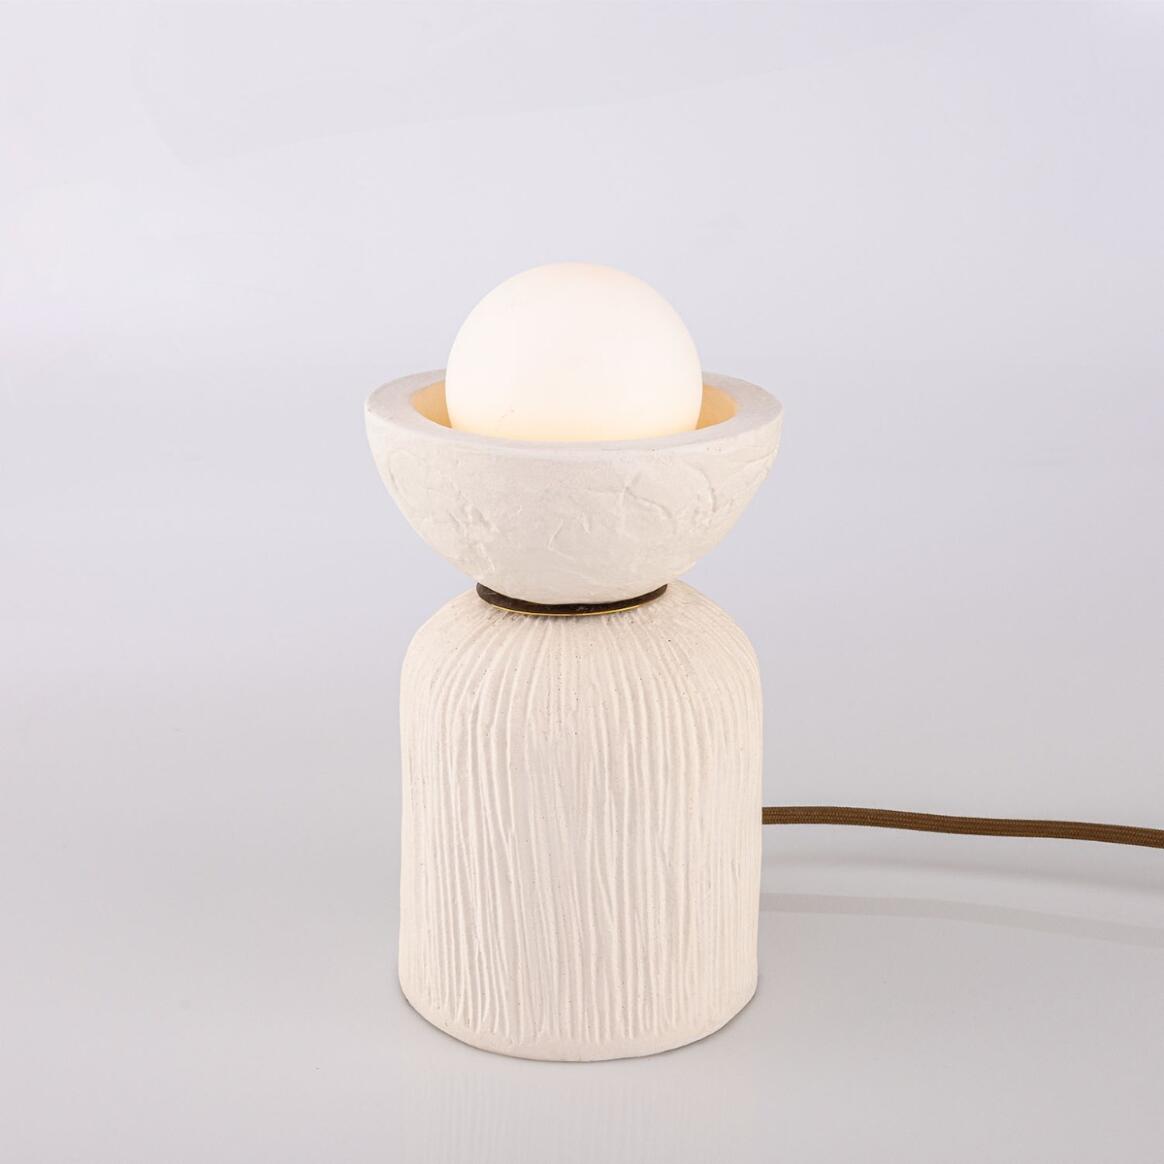 Prali Ceramic Table Lamp with Glass Globe, Matte White Striped main product image